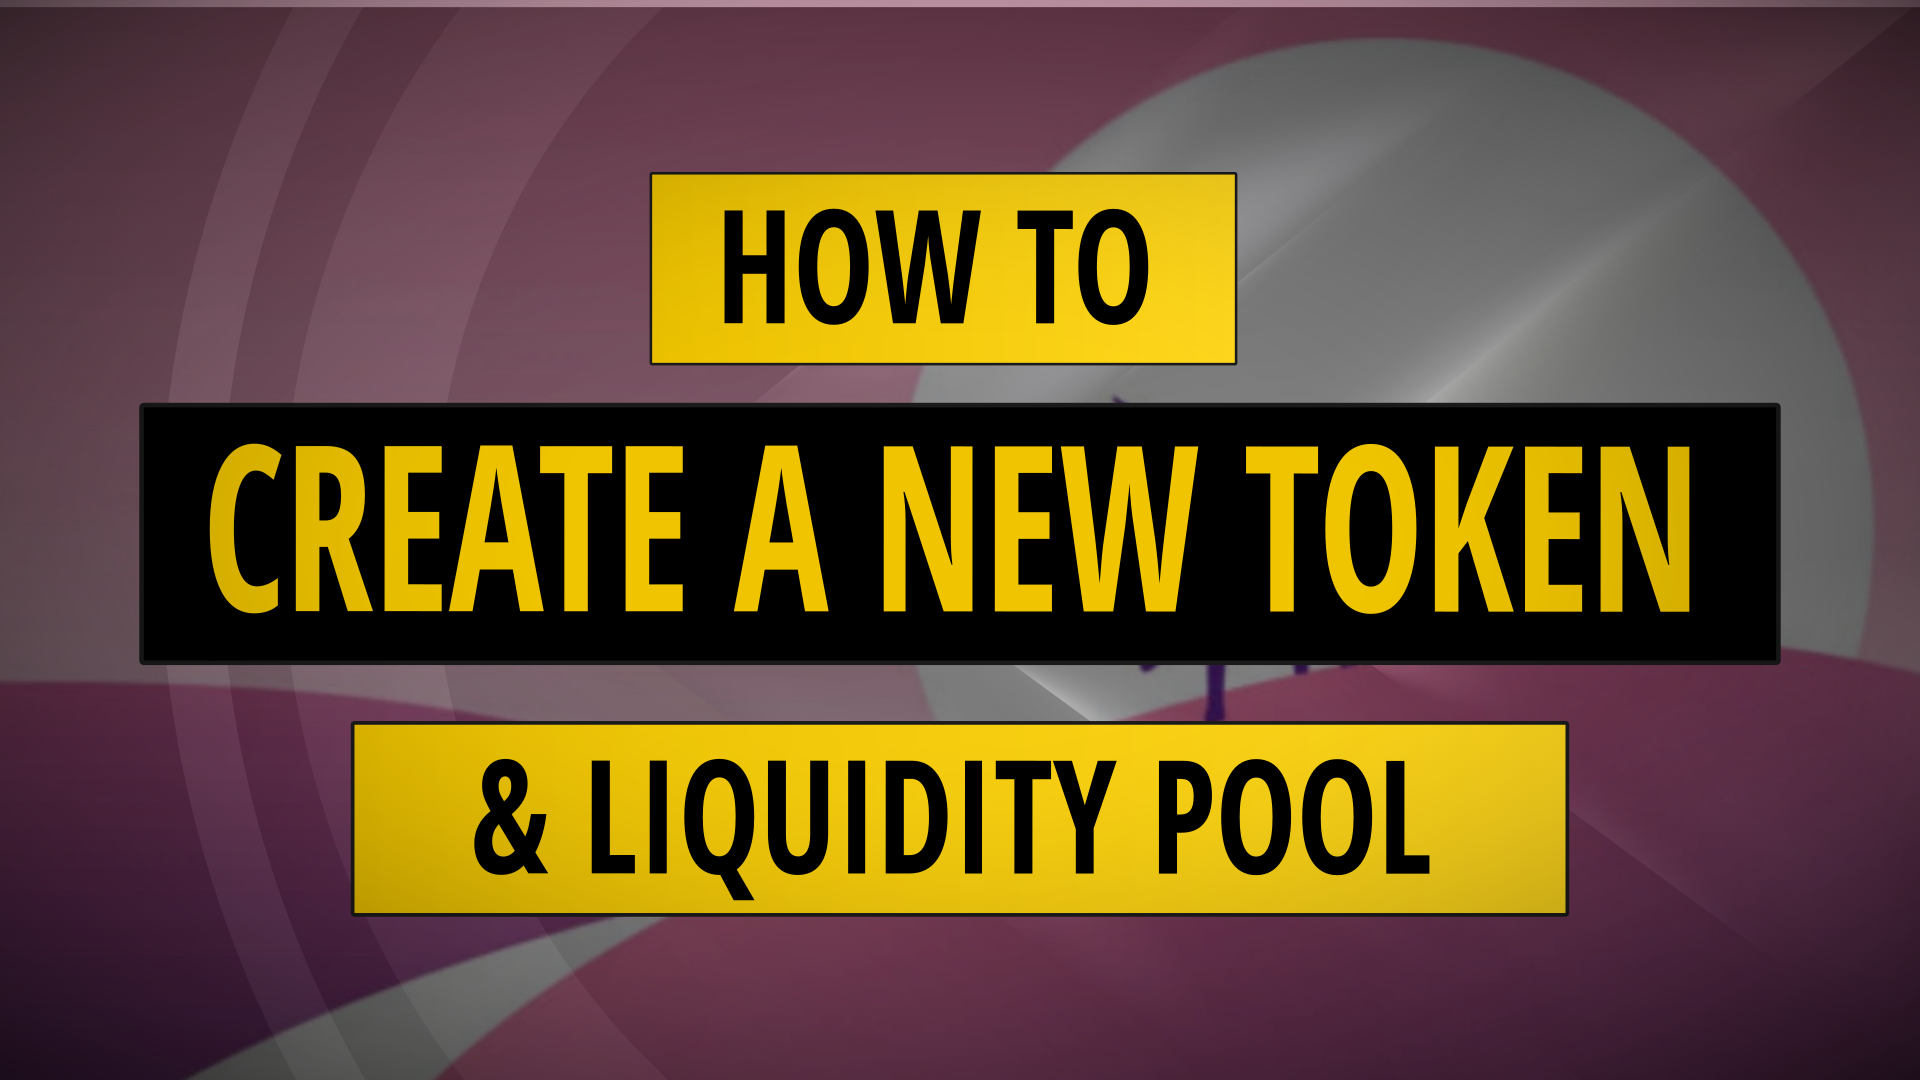 How To Create A New Token